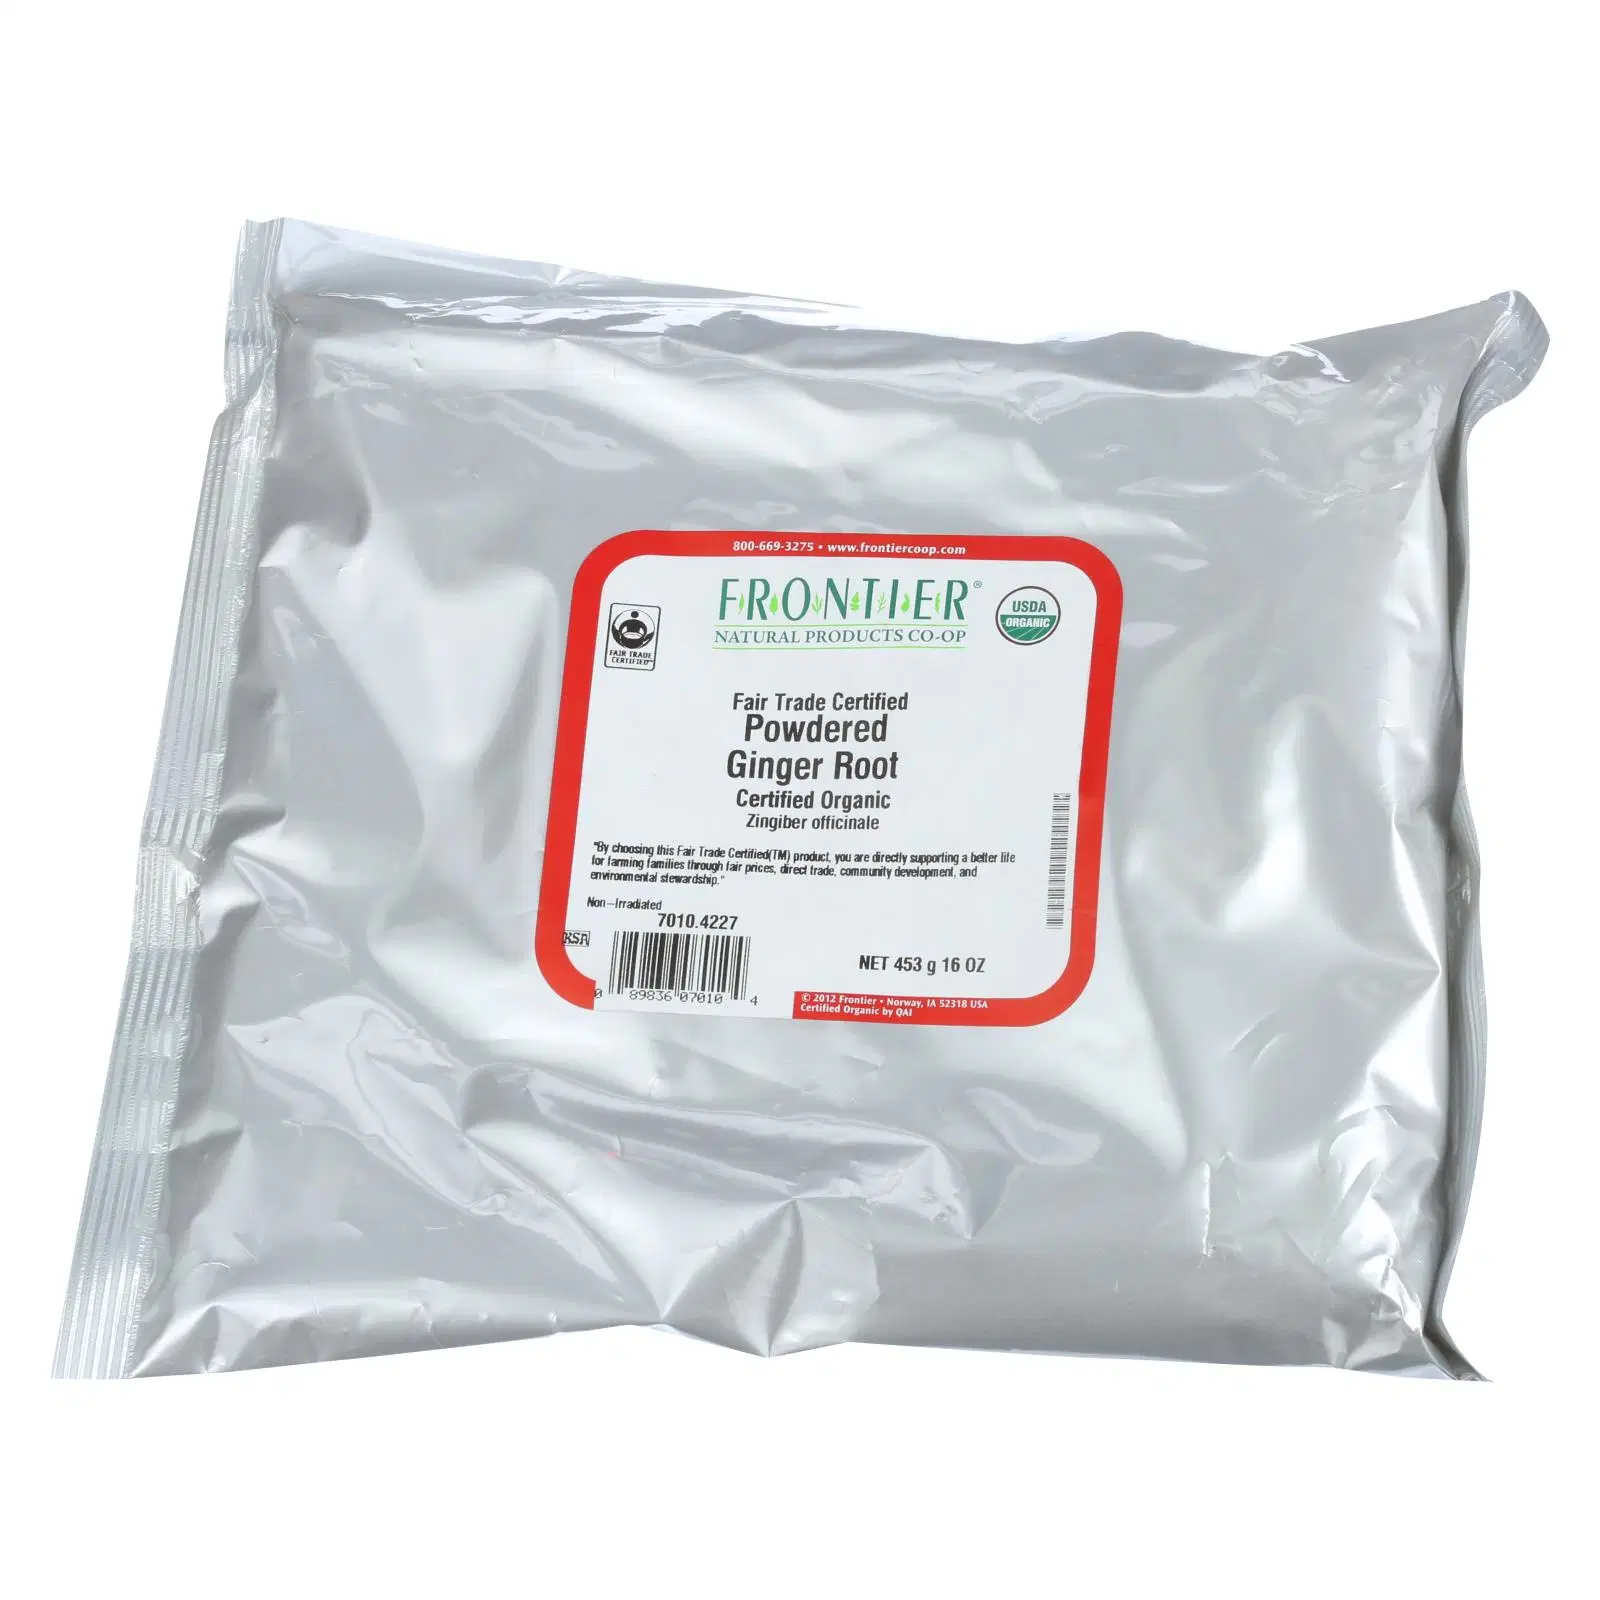 Frontier Co Op Organic Ginger Root 1lb, ground, Bulk bag powder spice fa... - $37.99